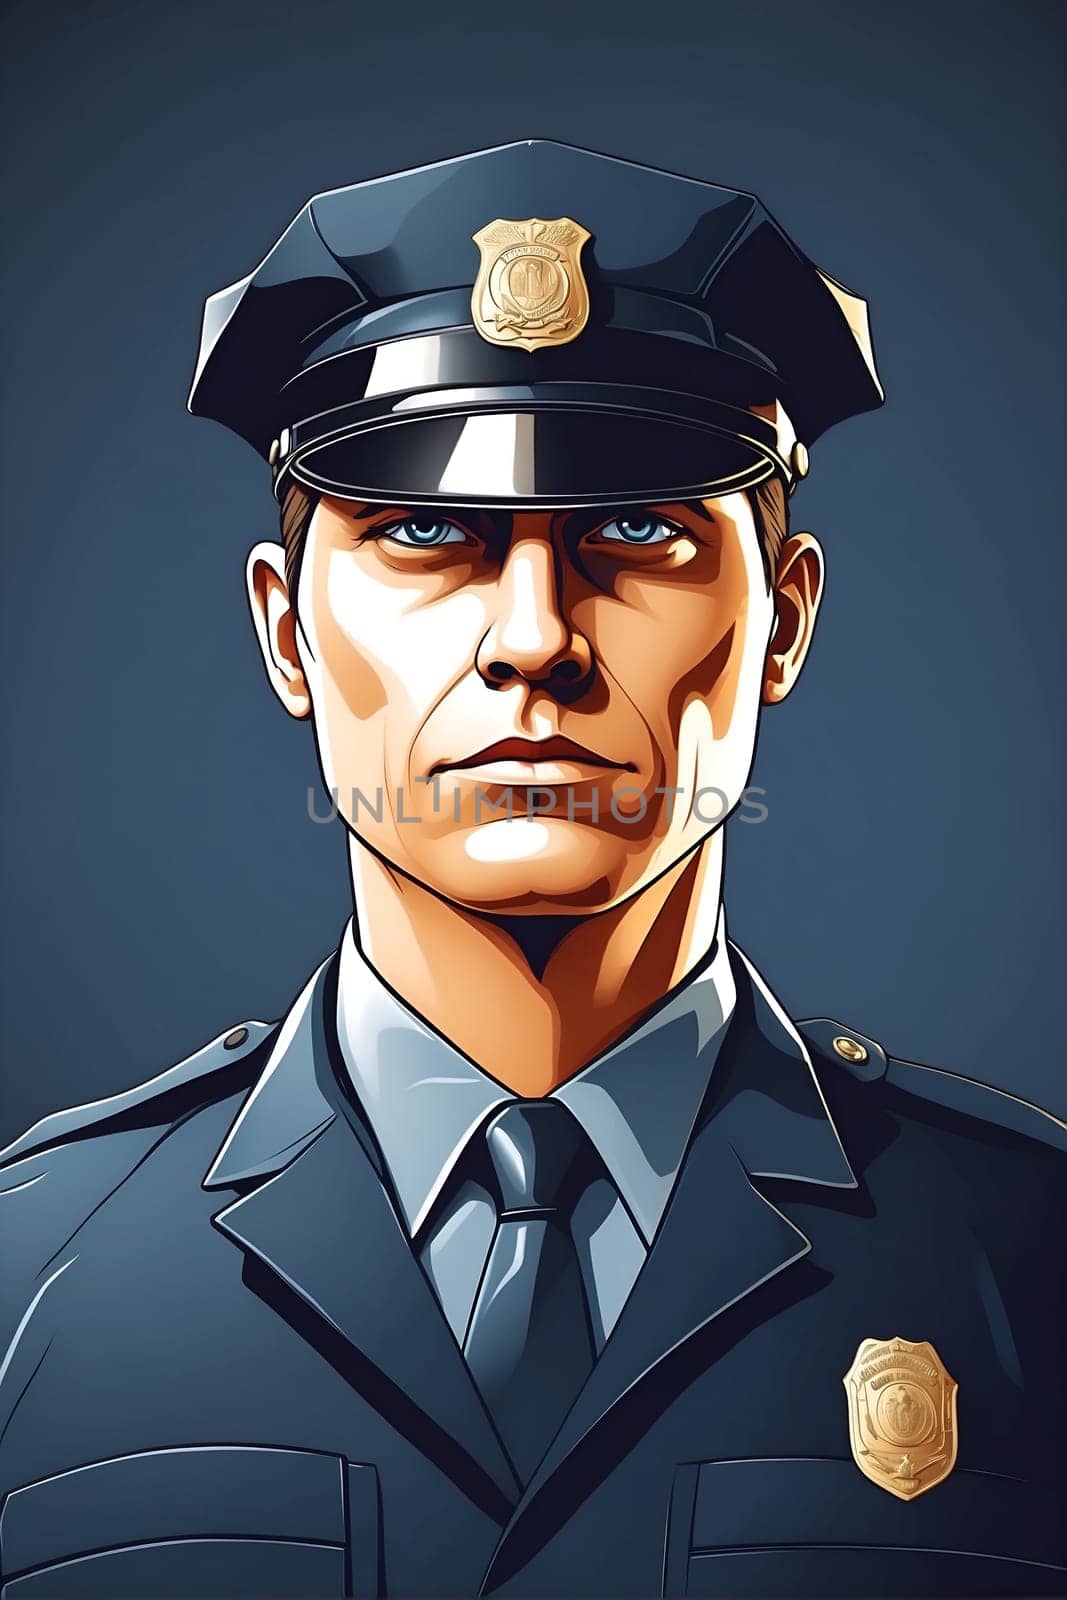 A police officer in a uniform with striking blue eyes embodies authority and vigilance, ensuring safety and upholding the law.